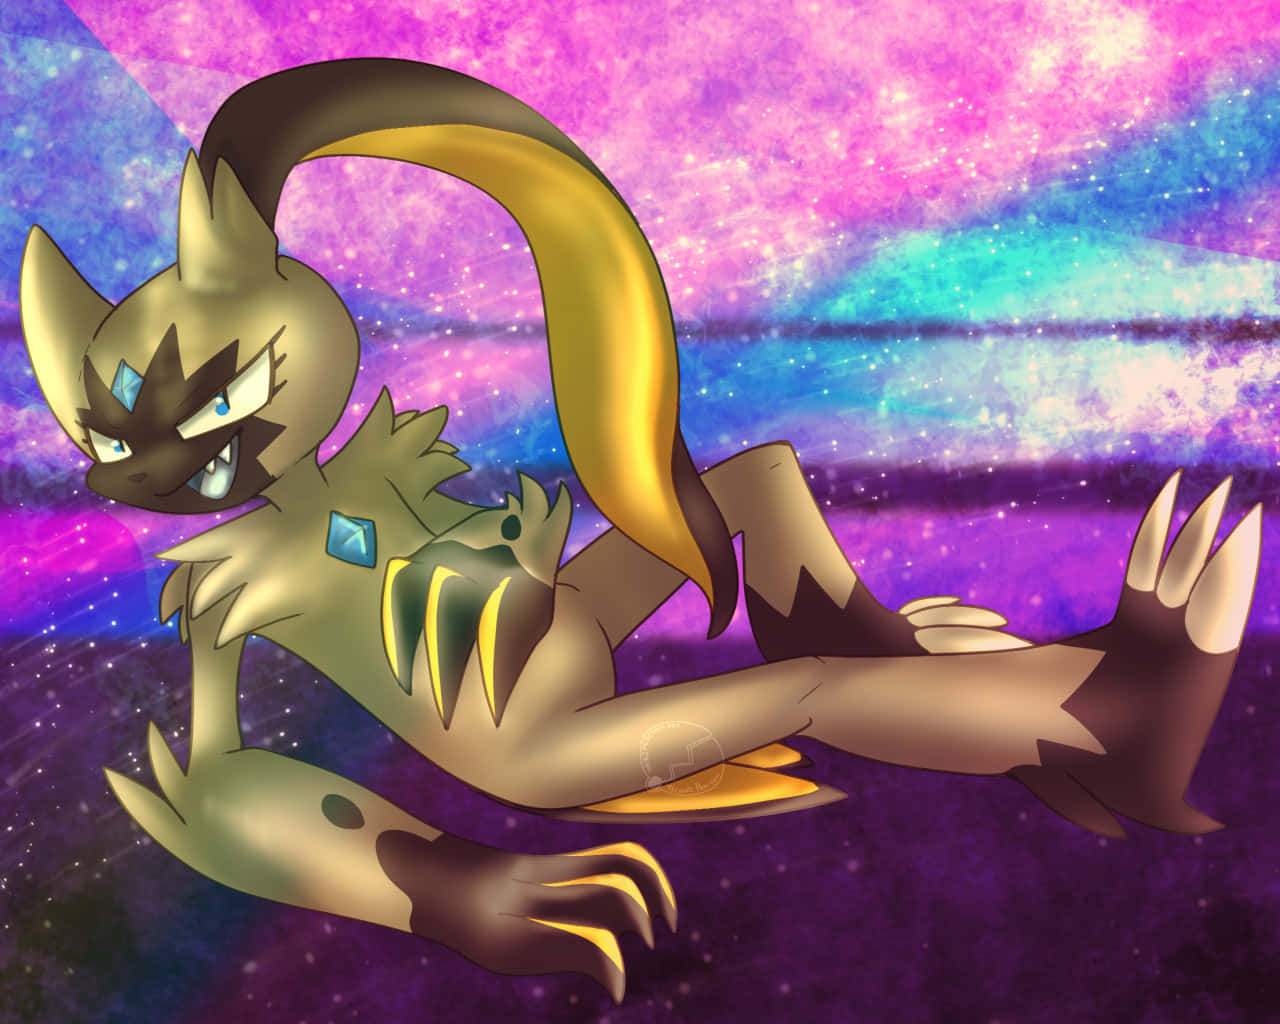 Shiny Sneasler Pokemon With Galaxy Background Wallpaper